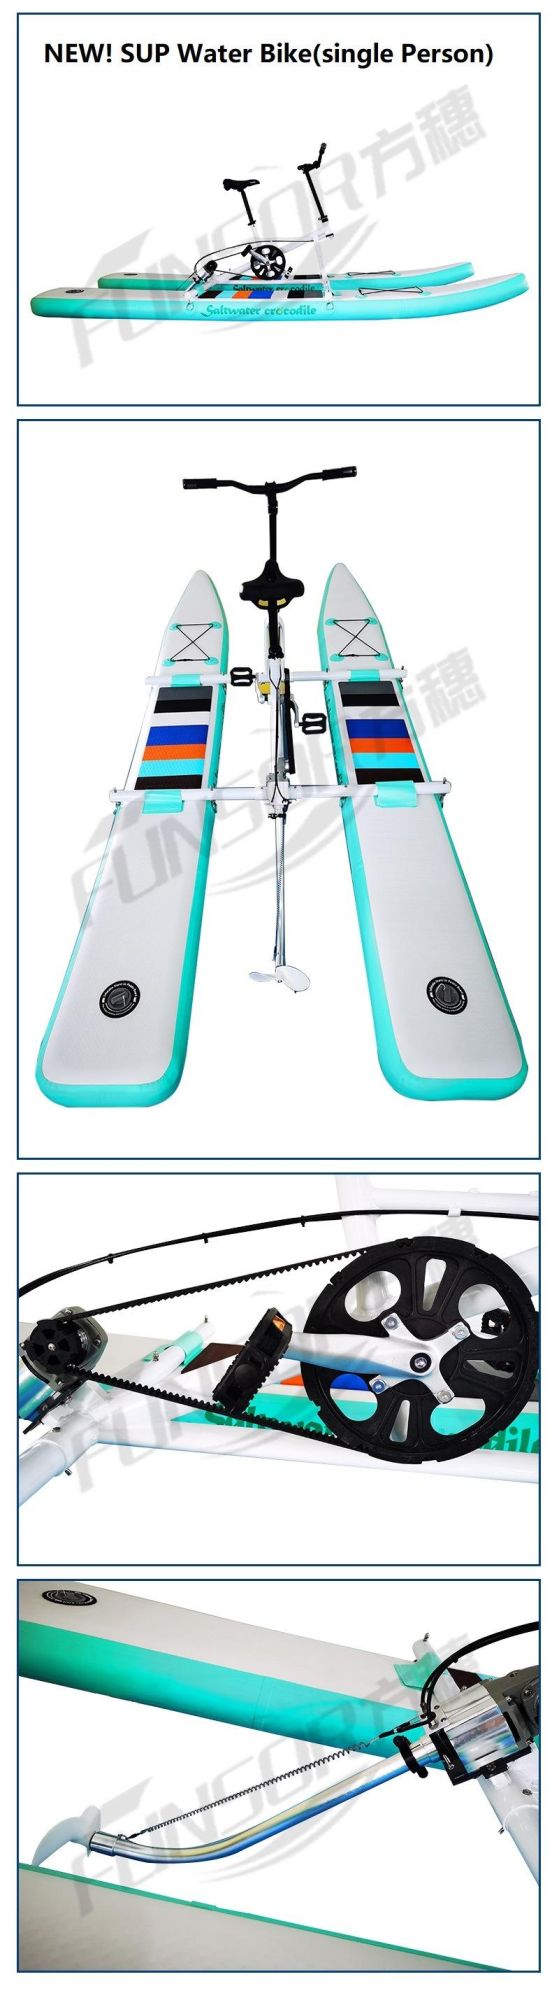 Resorts Sup Water Bike for Single Person River and Sea